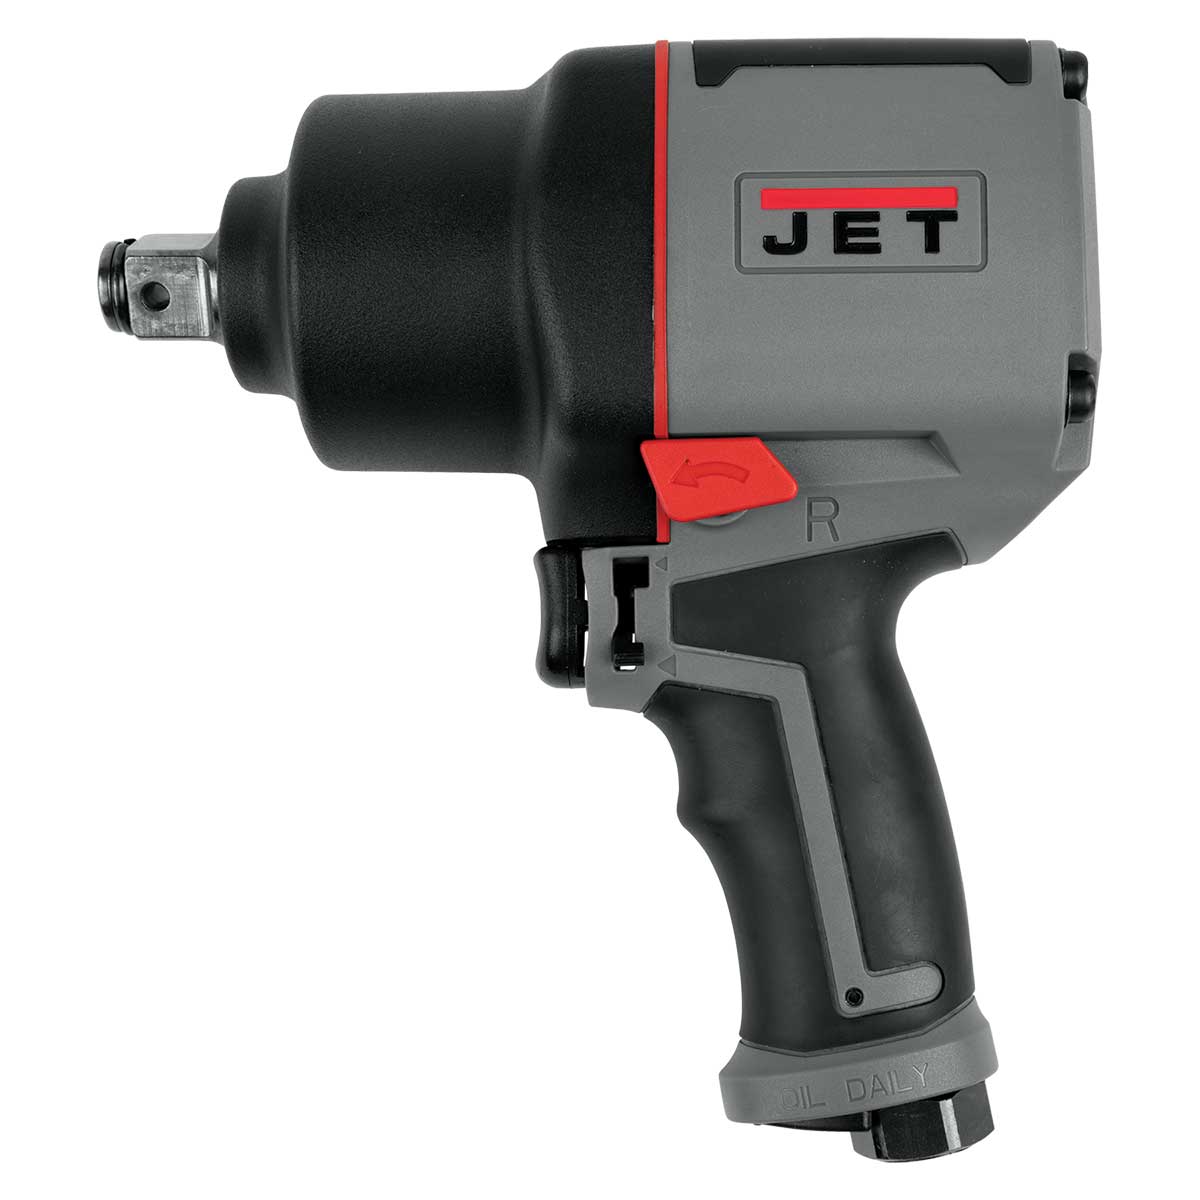 JET 3/4" Composite Air Impact Wrench